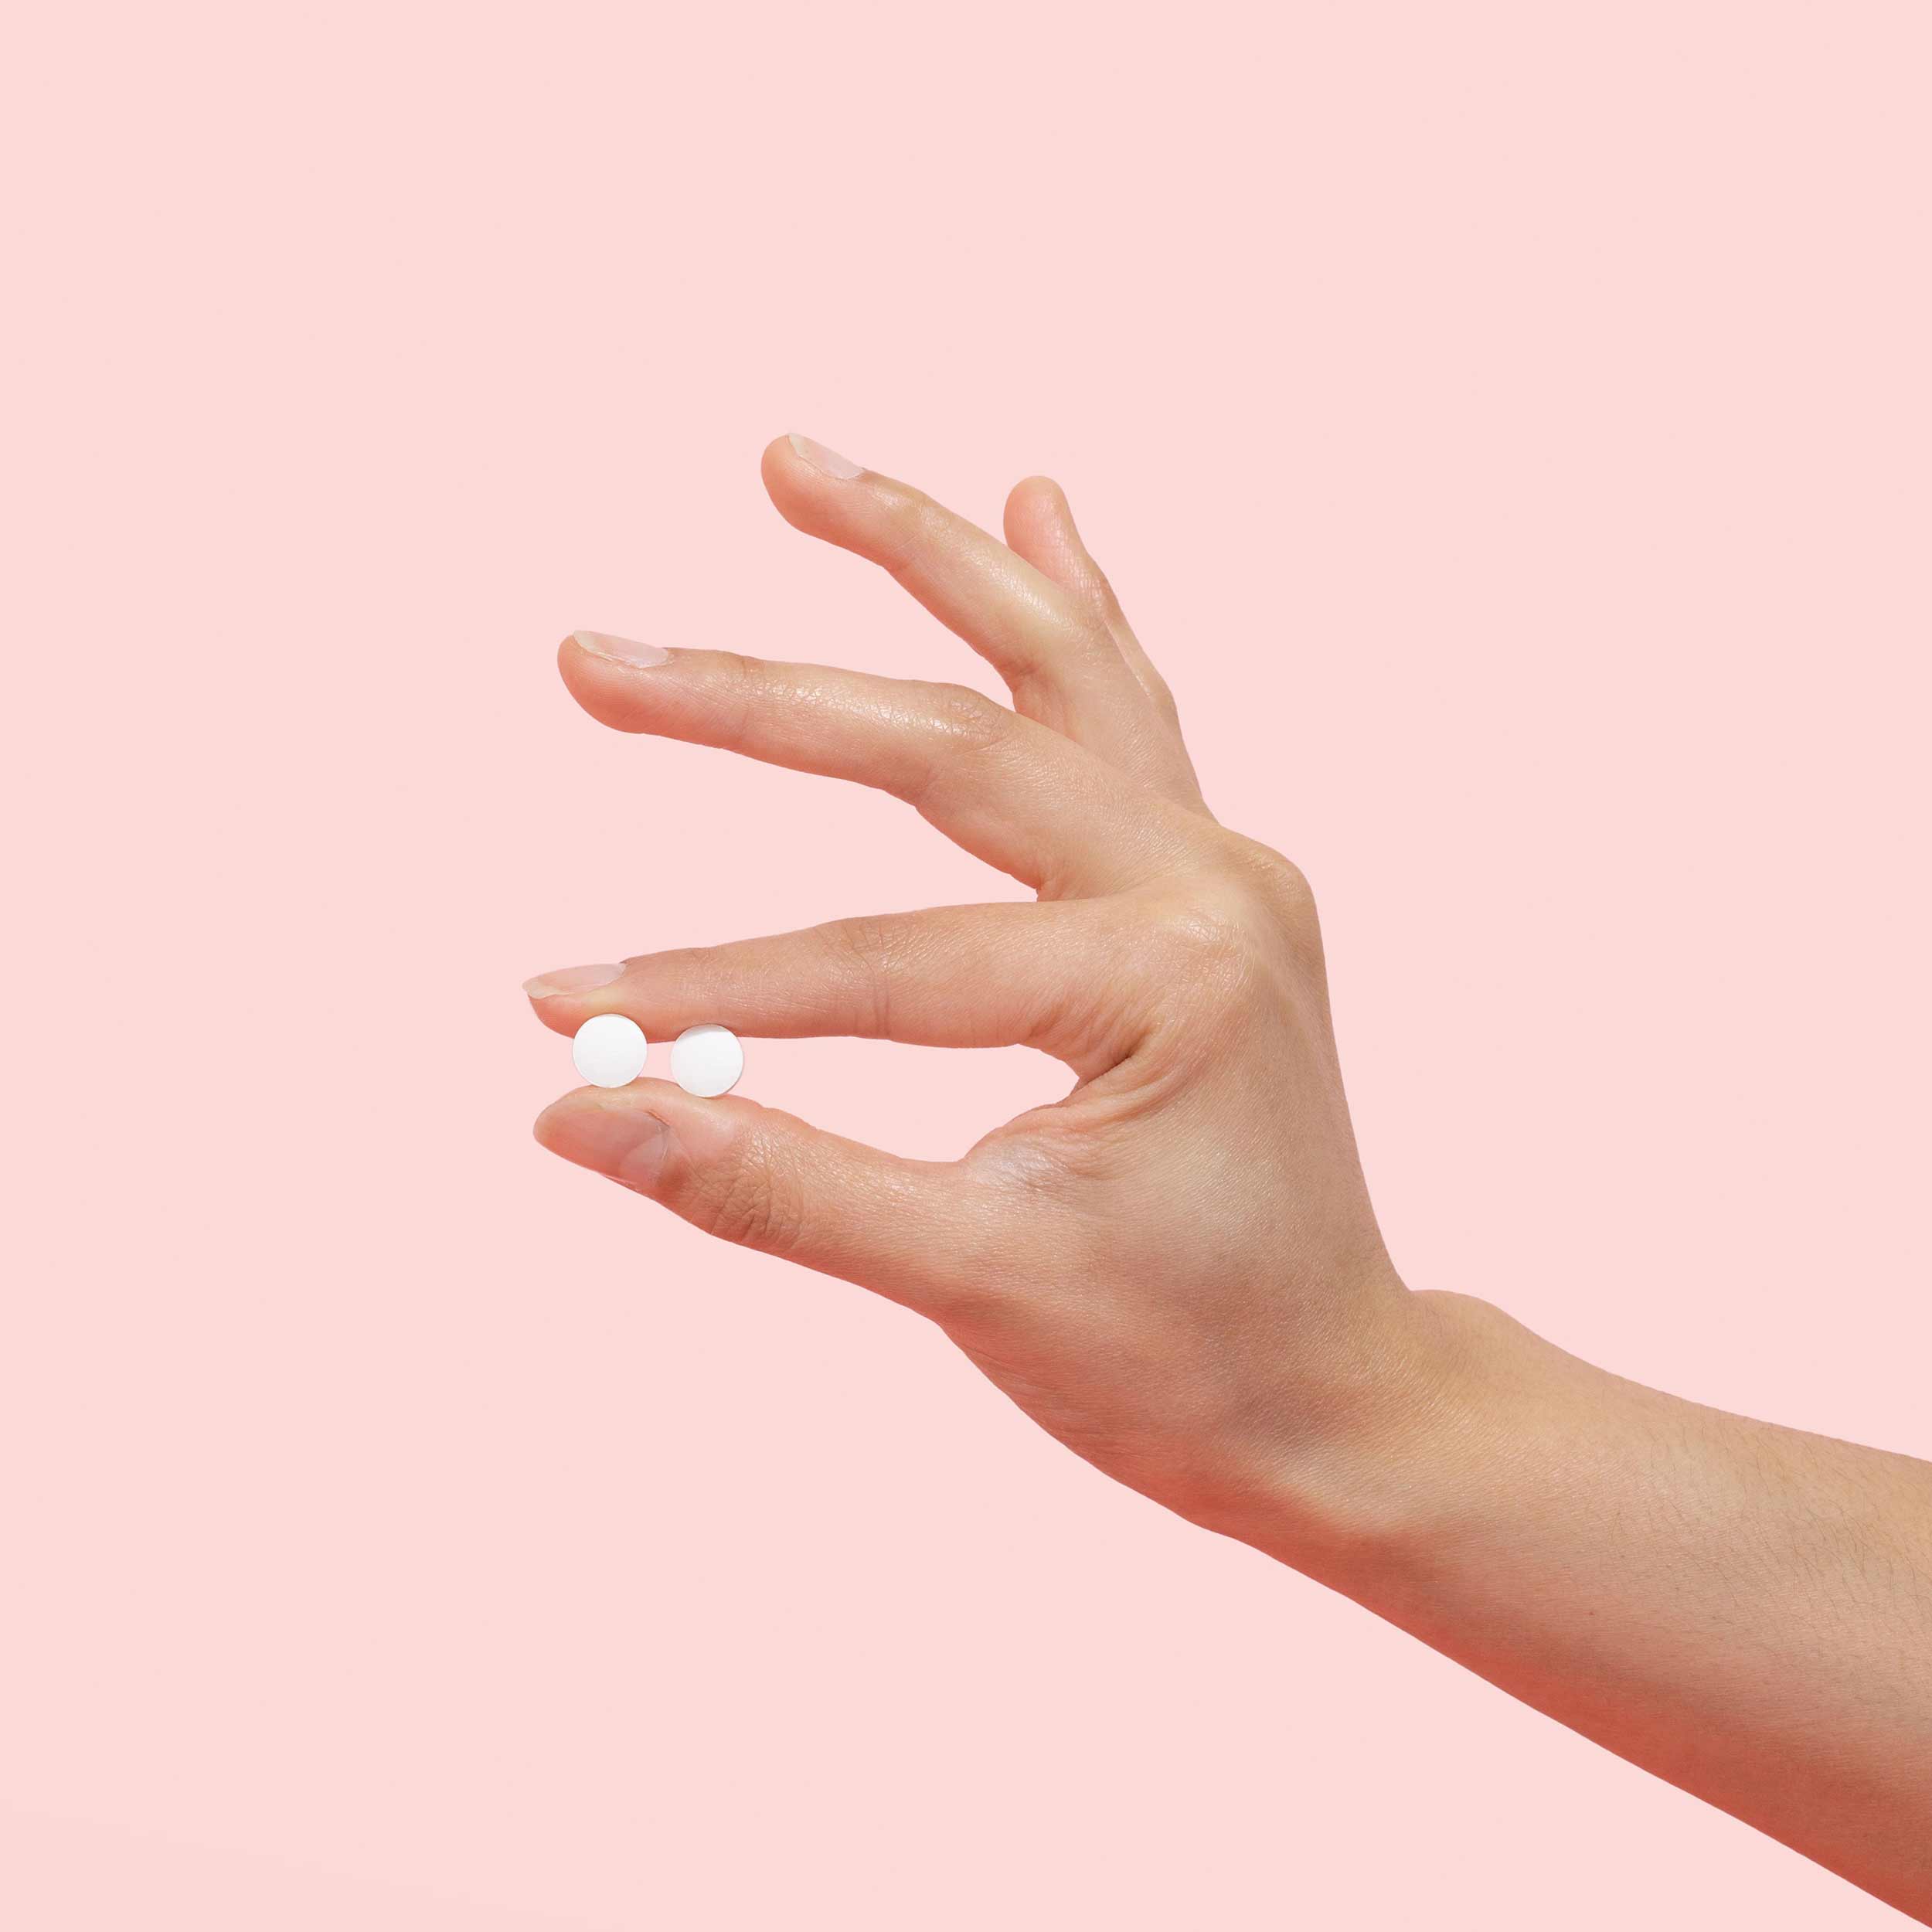 Woman's hand holds two probiotic pills against a pink background